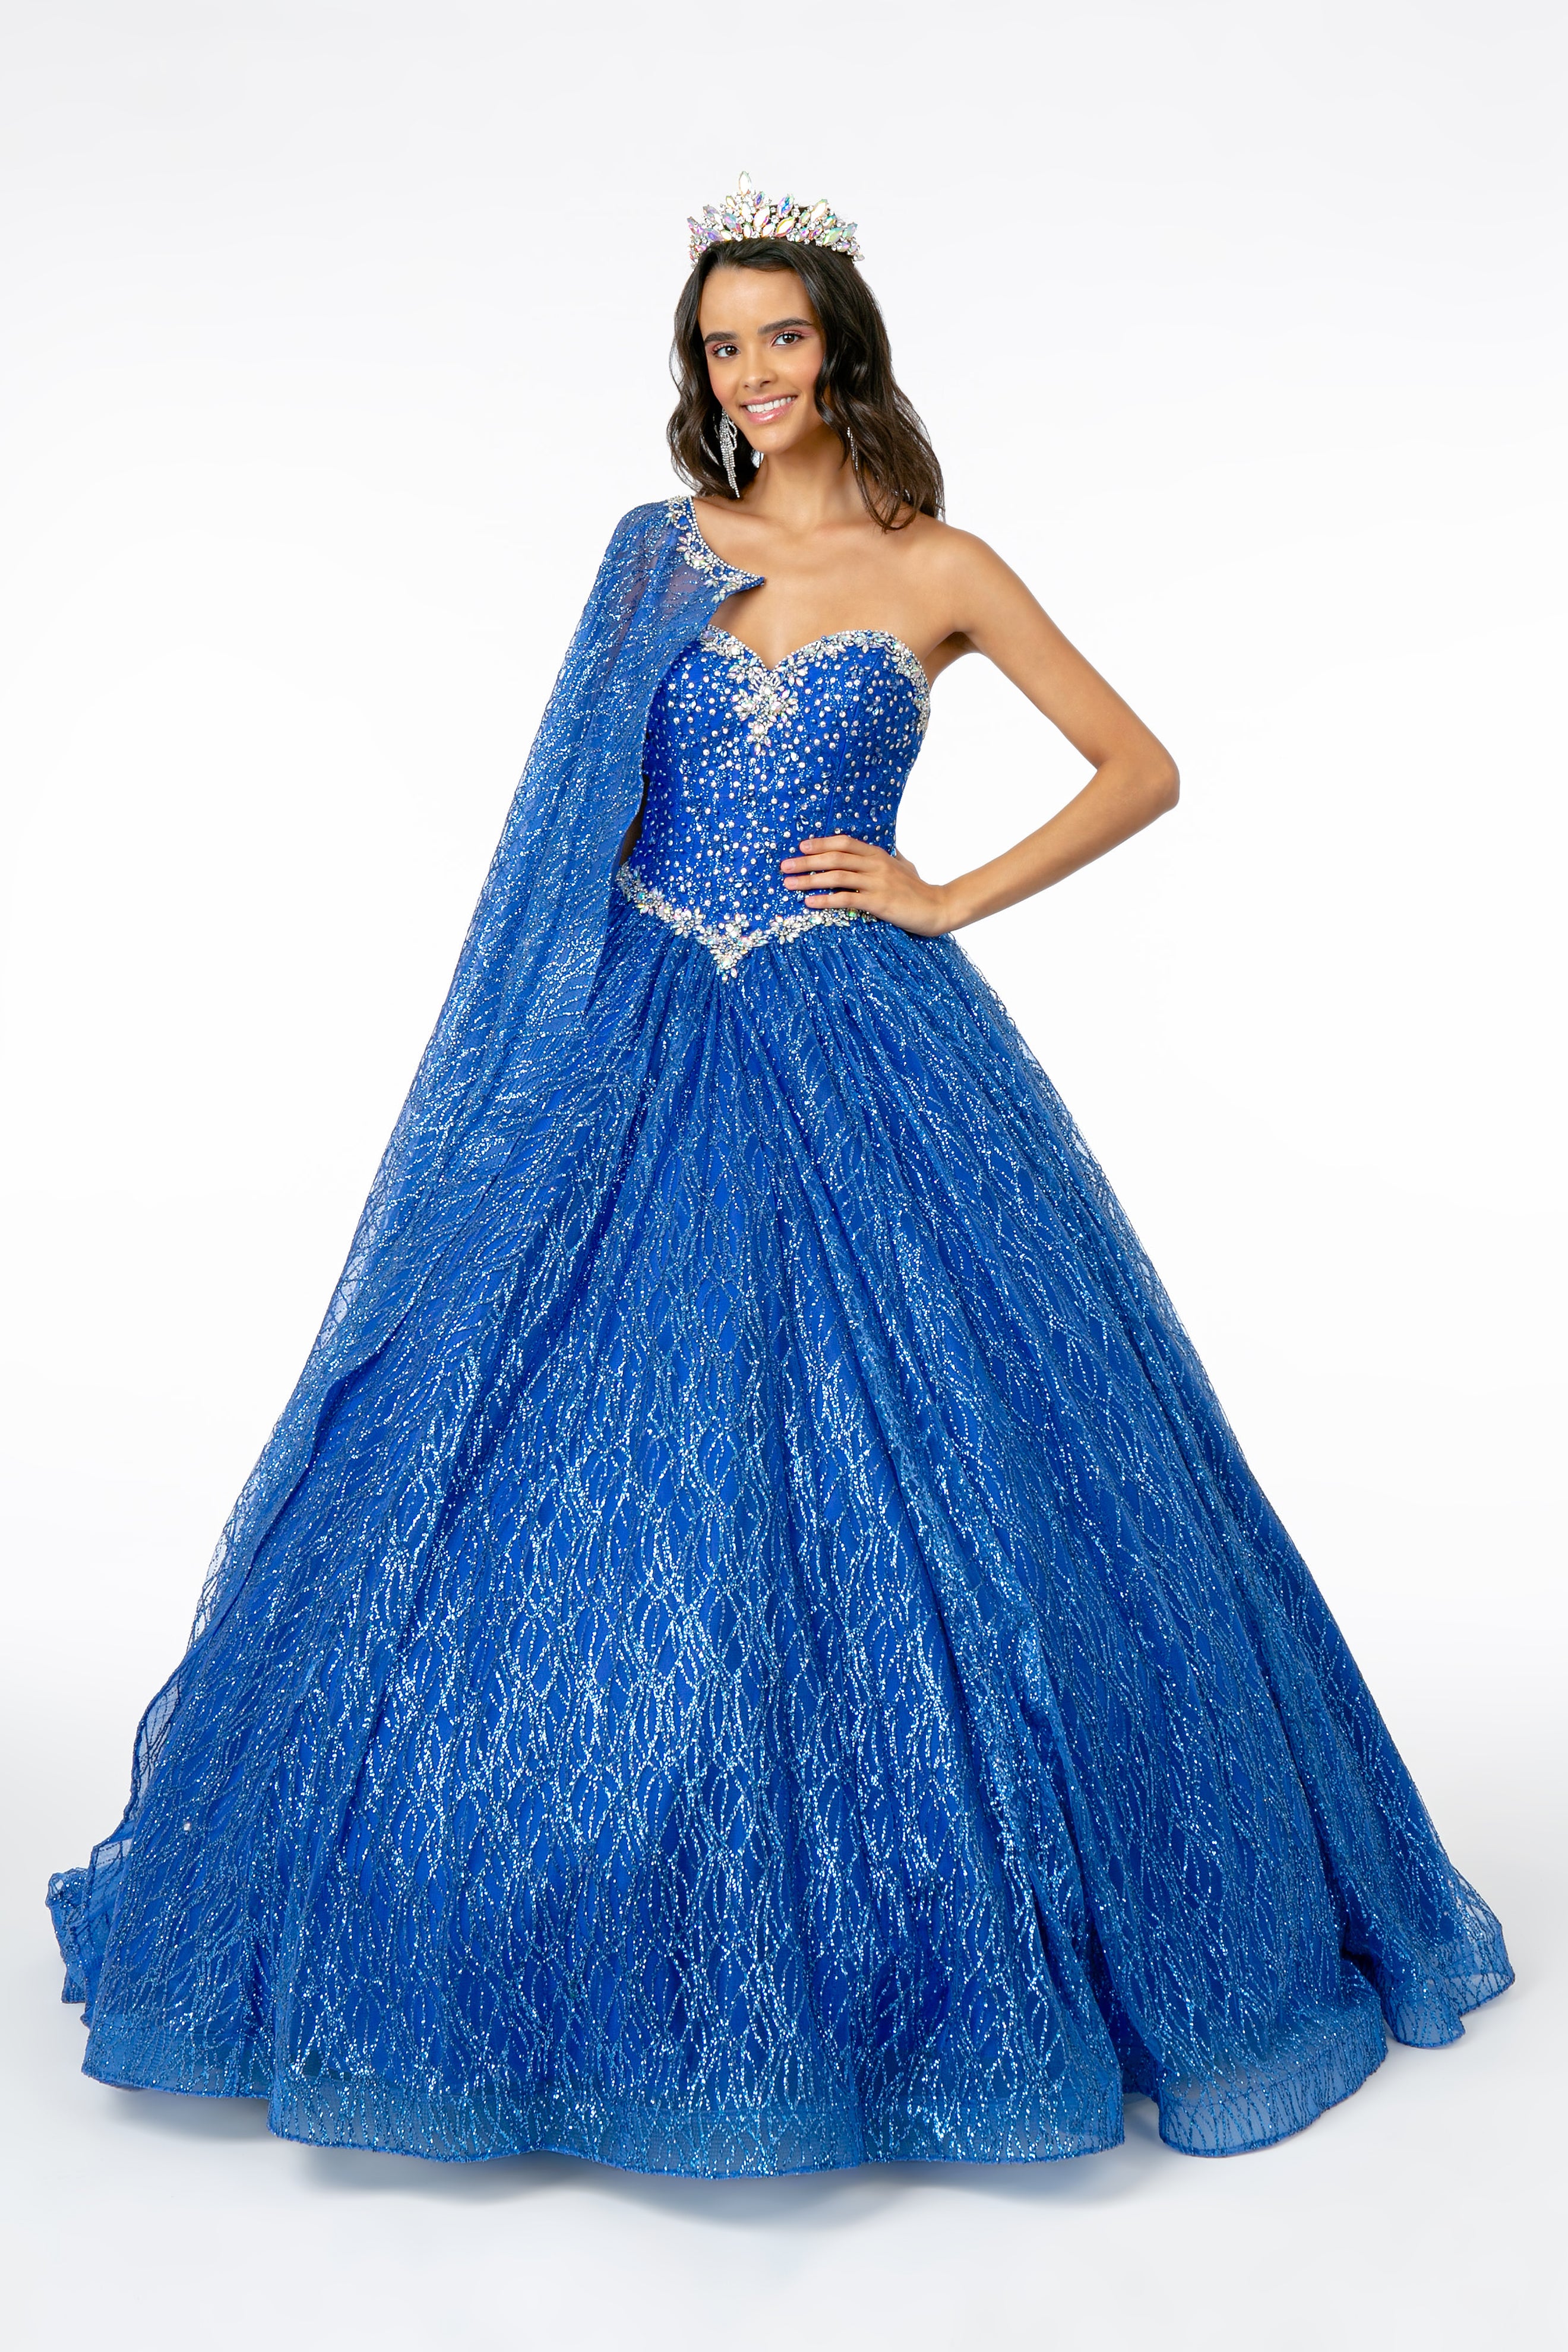 Embellished Bodice Glitter Gown with Mesh Cape-smcdress